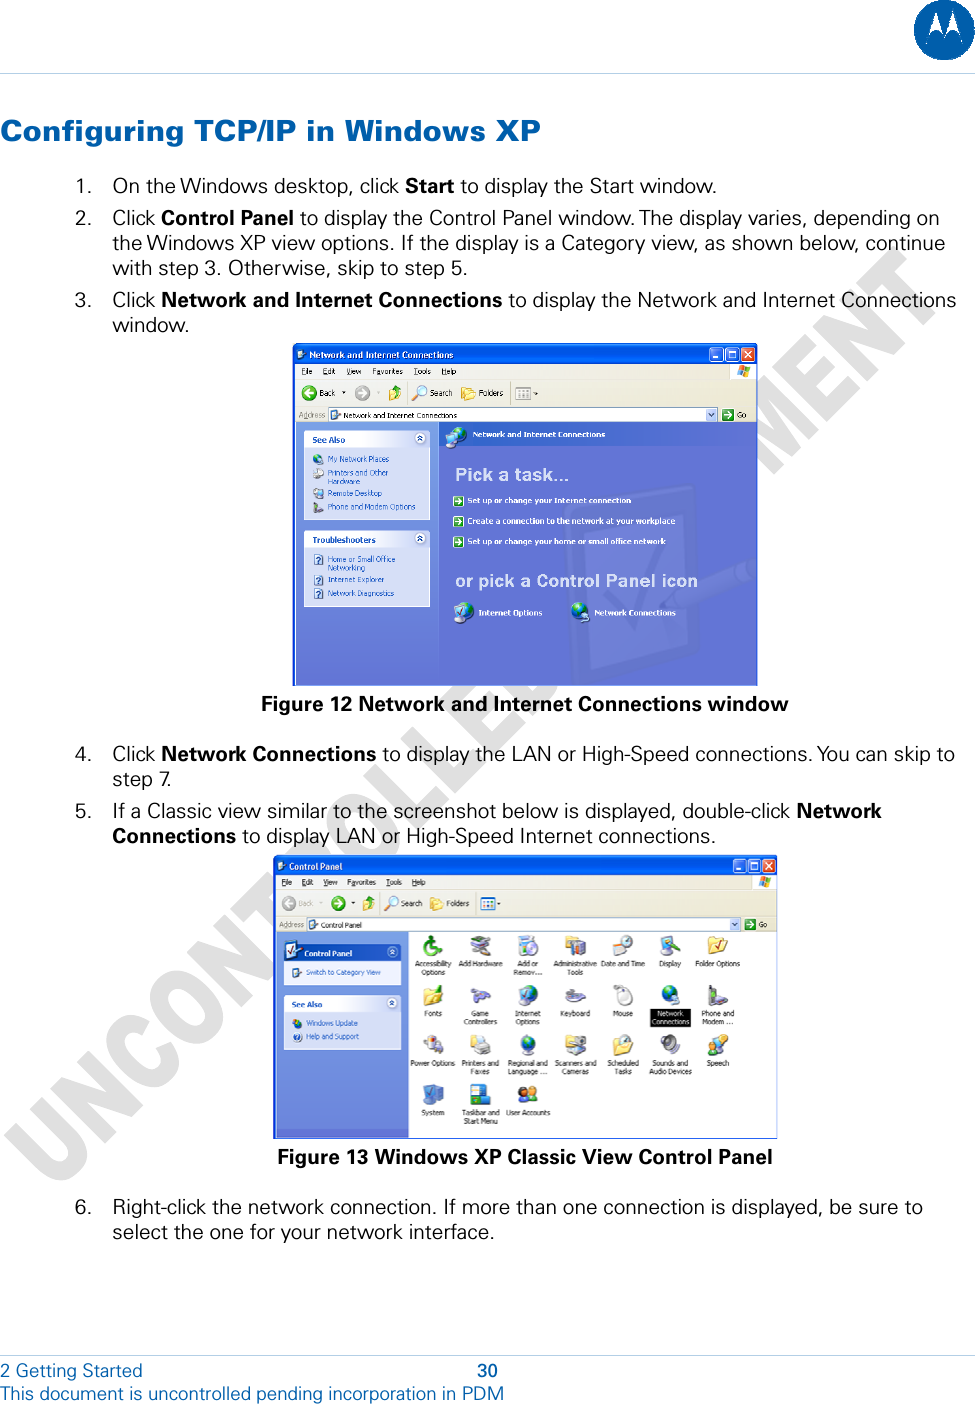  Configuring TCP/IP in Windows XP 1. On the Windows desktop, click Start to display the Start window. 2. Click Control Panel to display the Control Panel window. The display varies, depending on the Windows XP view options. If the display is a Category view, as shown below, continue with step 3. Otherwise, skip to step 5. 3. Click Network and Internet Connections to display the Network and Internet Connections window.  Figure 12 Network and Internet Connections window 4. Click Network Connections to display the LAN or High-Speed connections. You can skip to step 7. 5. If a Classic view similar to the screenshot below is displayed, double-click Network Connections to display LAN or High-Speed Internet connections.  Figure 13 Windows XP Classic View Control Panel 6. Right-click the network connection. If more than one connection is displayed, be sure to select the one for your network interface. 2 Getting Started  30 This document is uncontrolled pending incorporation in PDM  